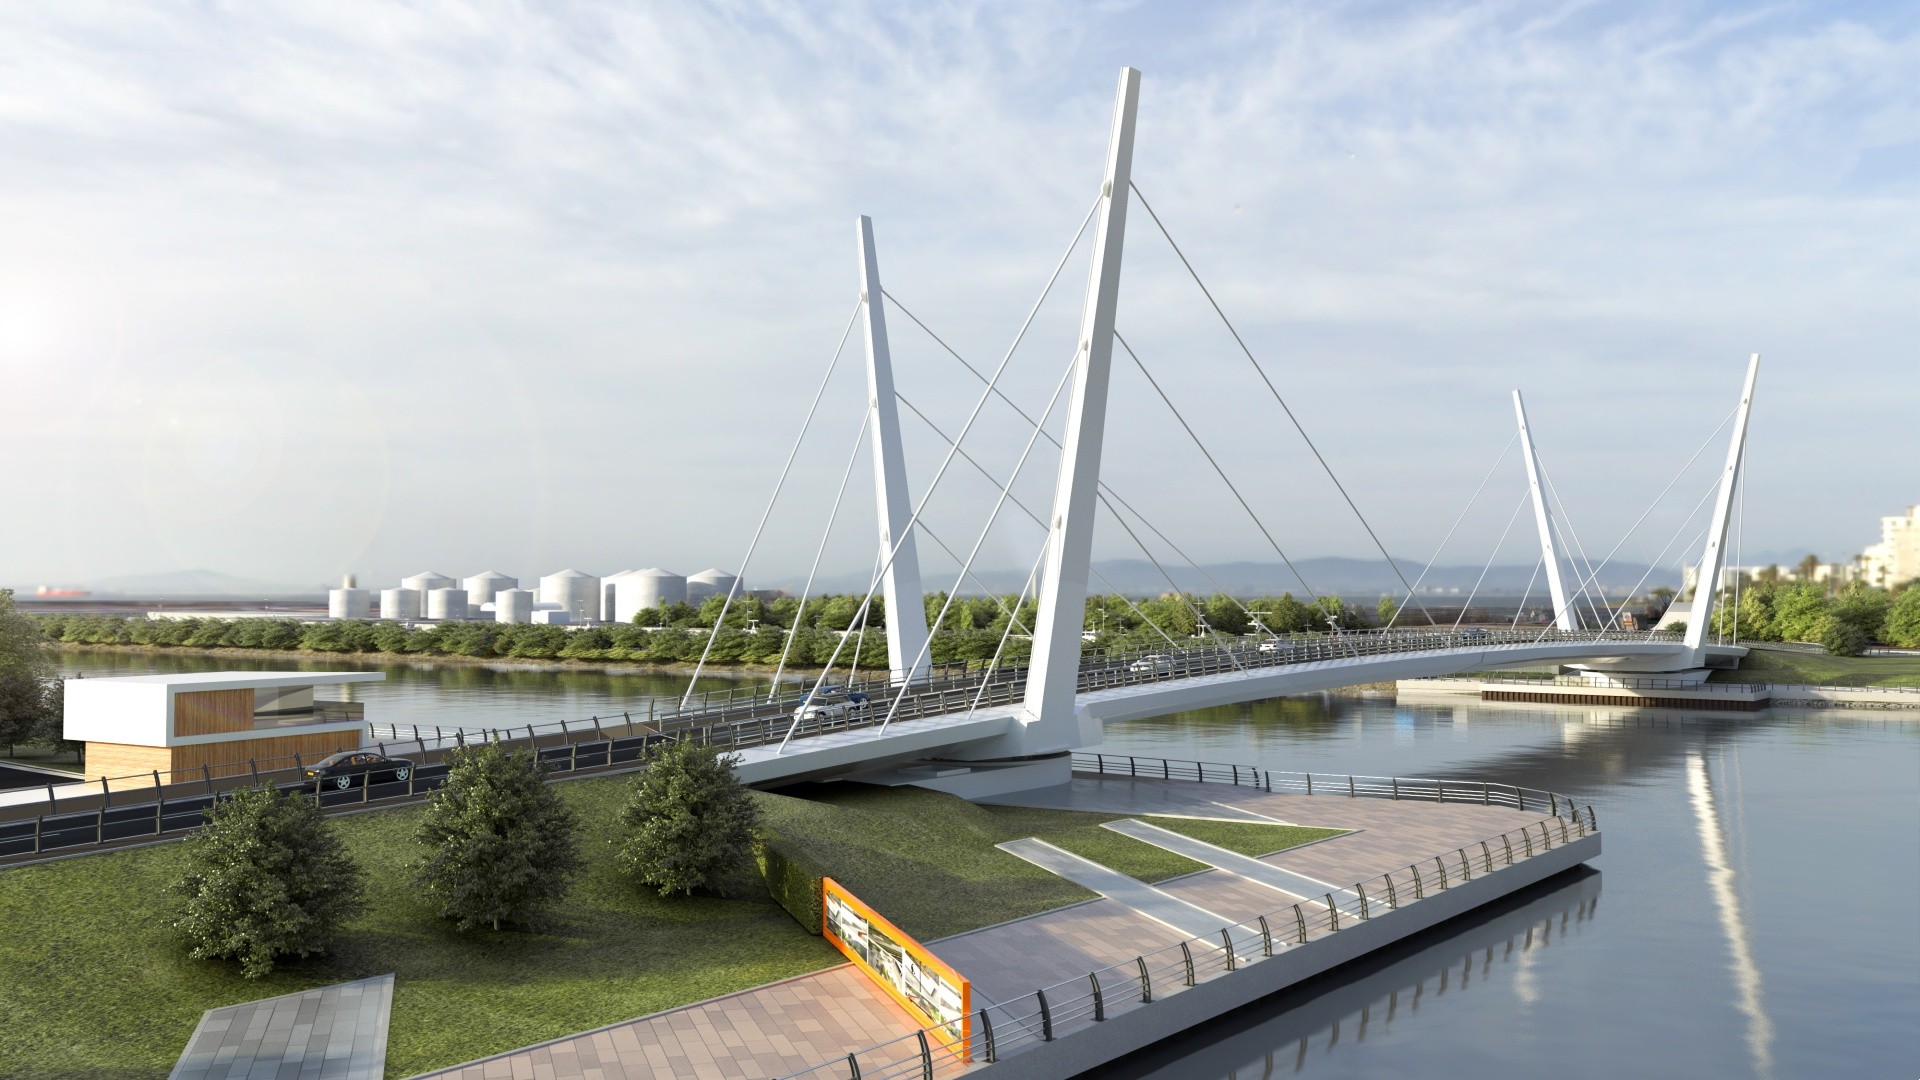 Iconic design of the clyde swing bridge CaSE civil and structural engineering project